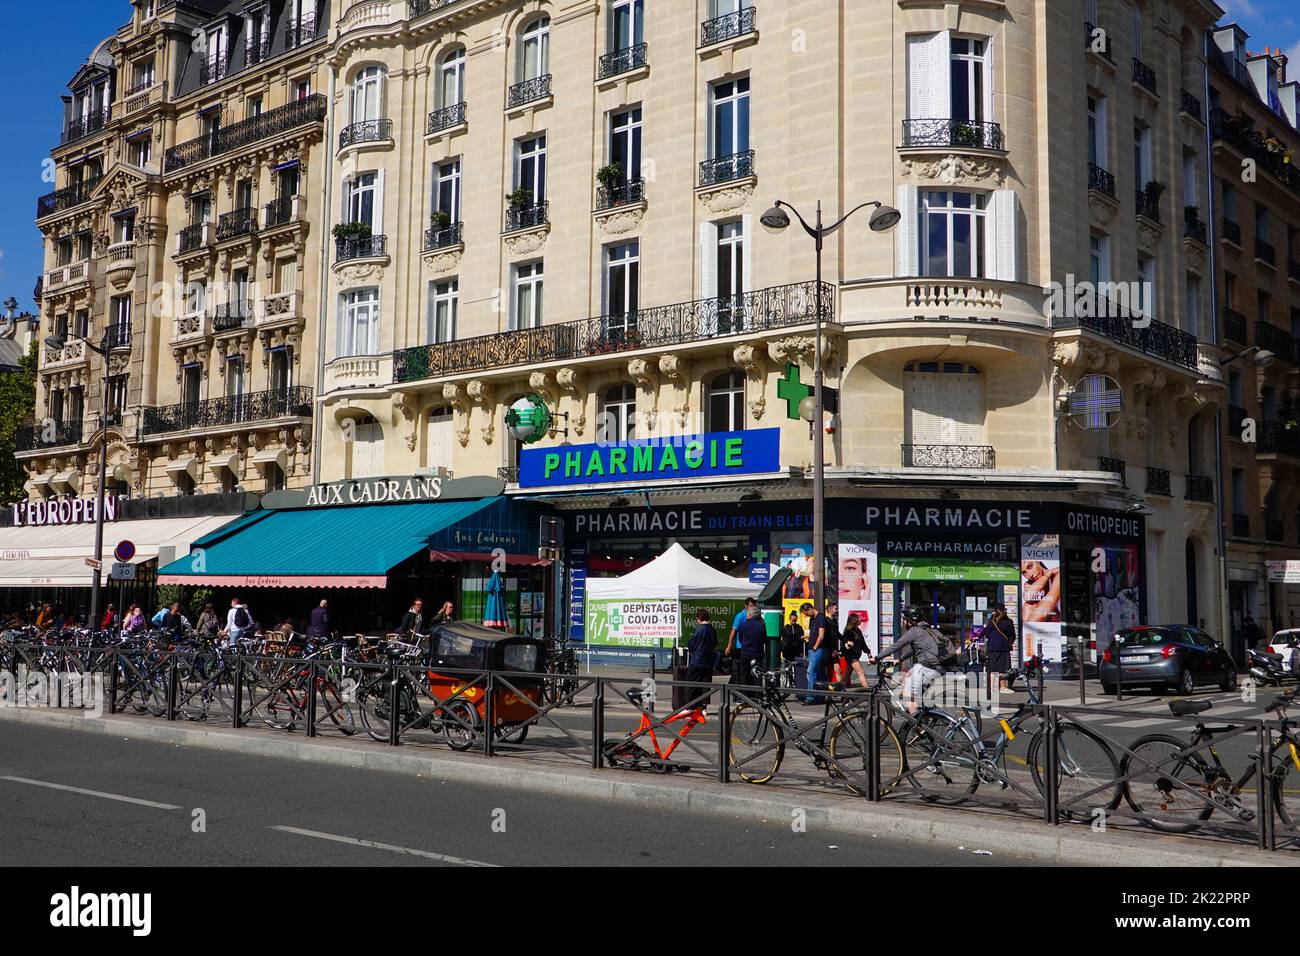 People, bicycles, busy area across from a Paris train station with a pharmacy, offering Covid testing, and other shops located in Haussmann building. Stock Photo